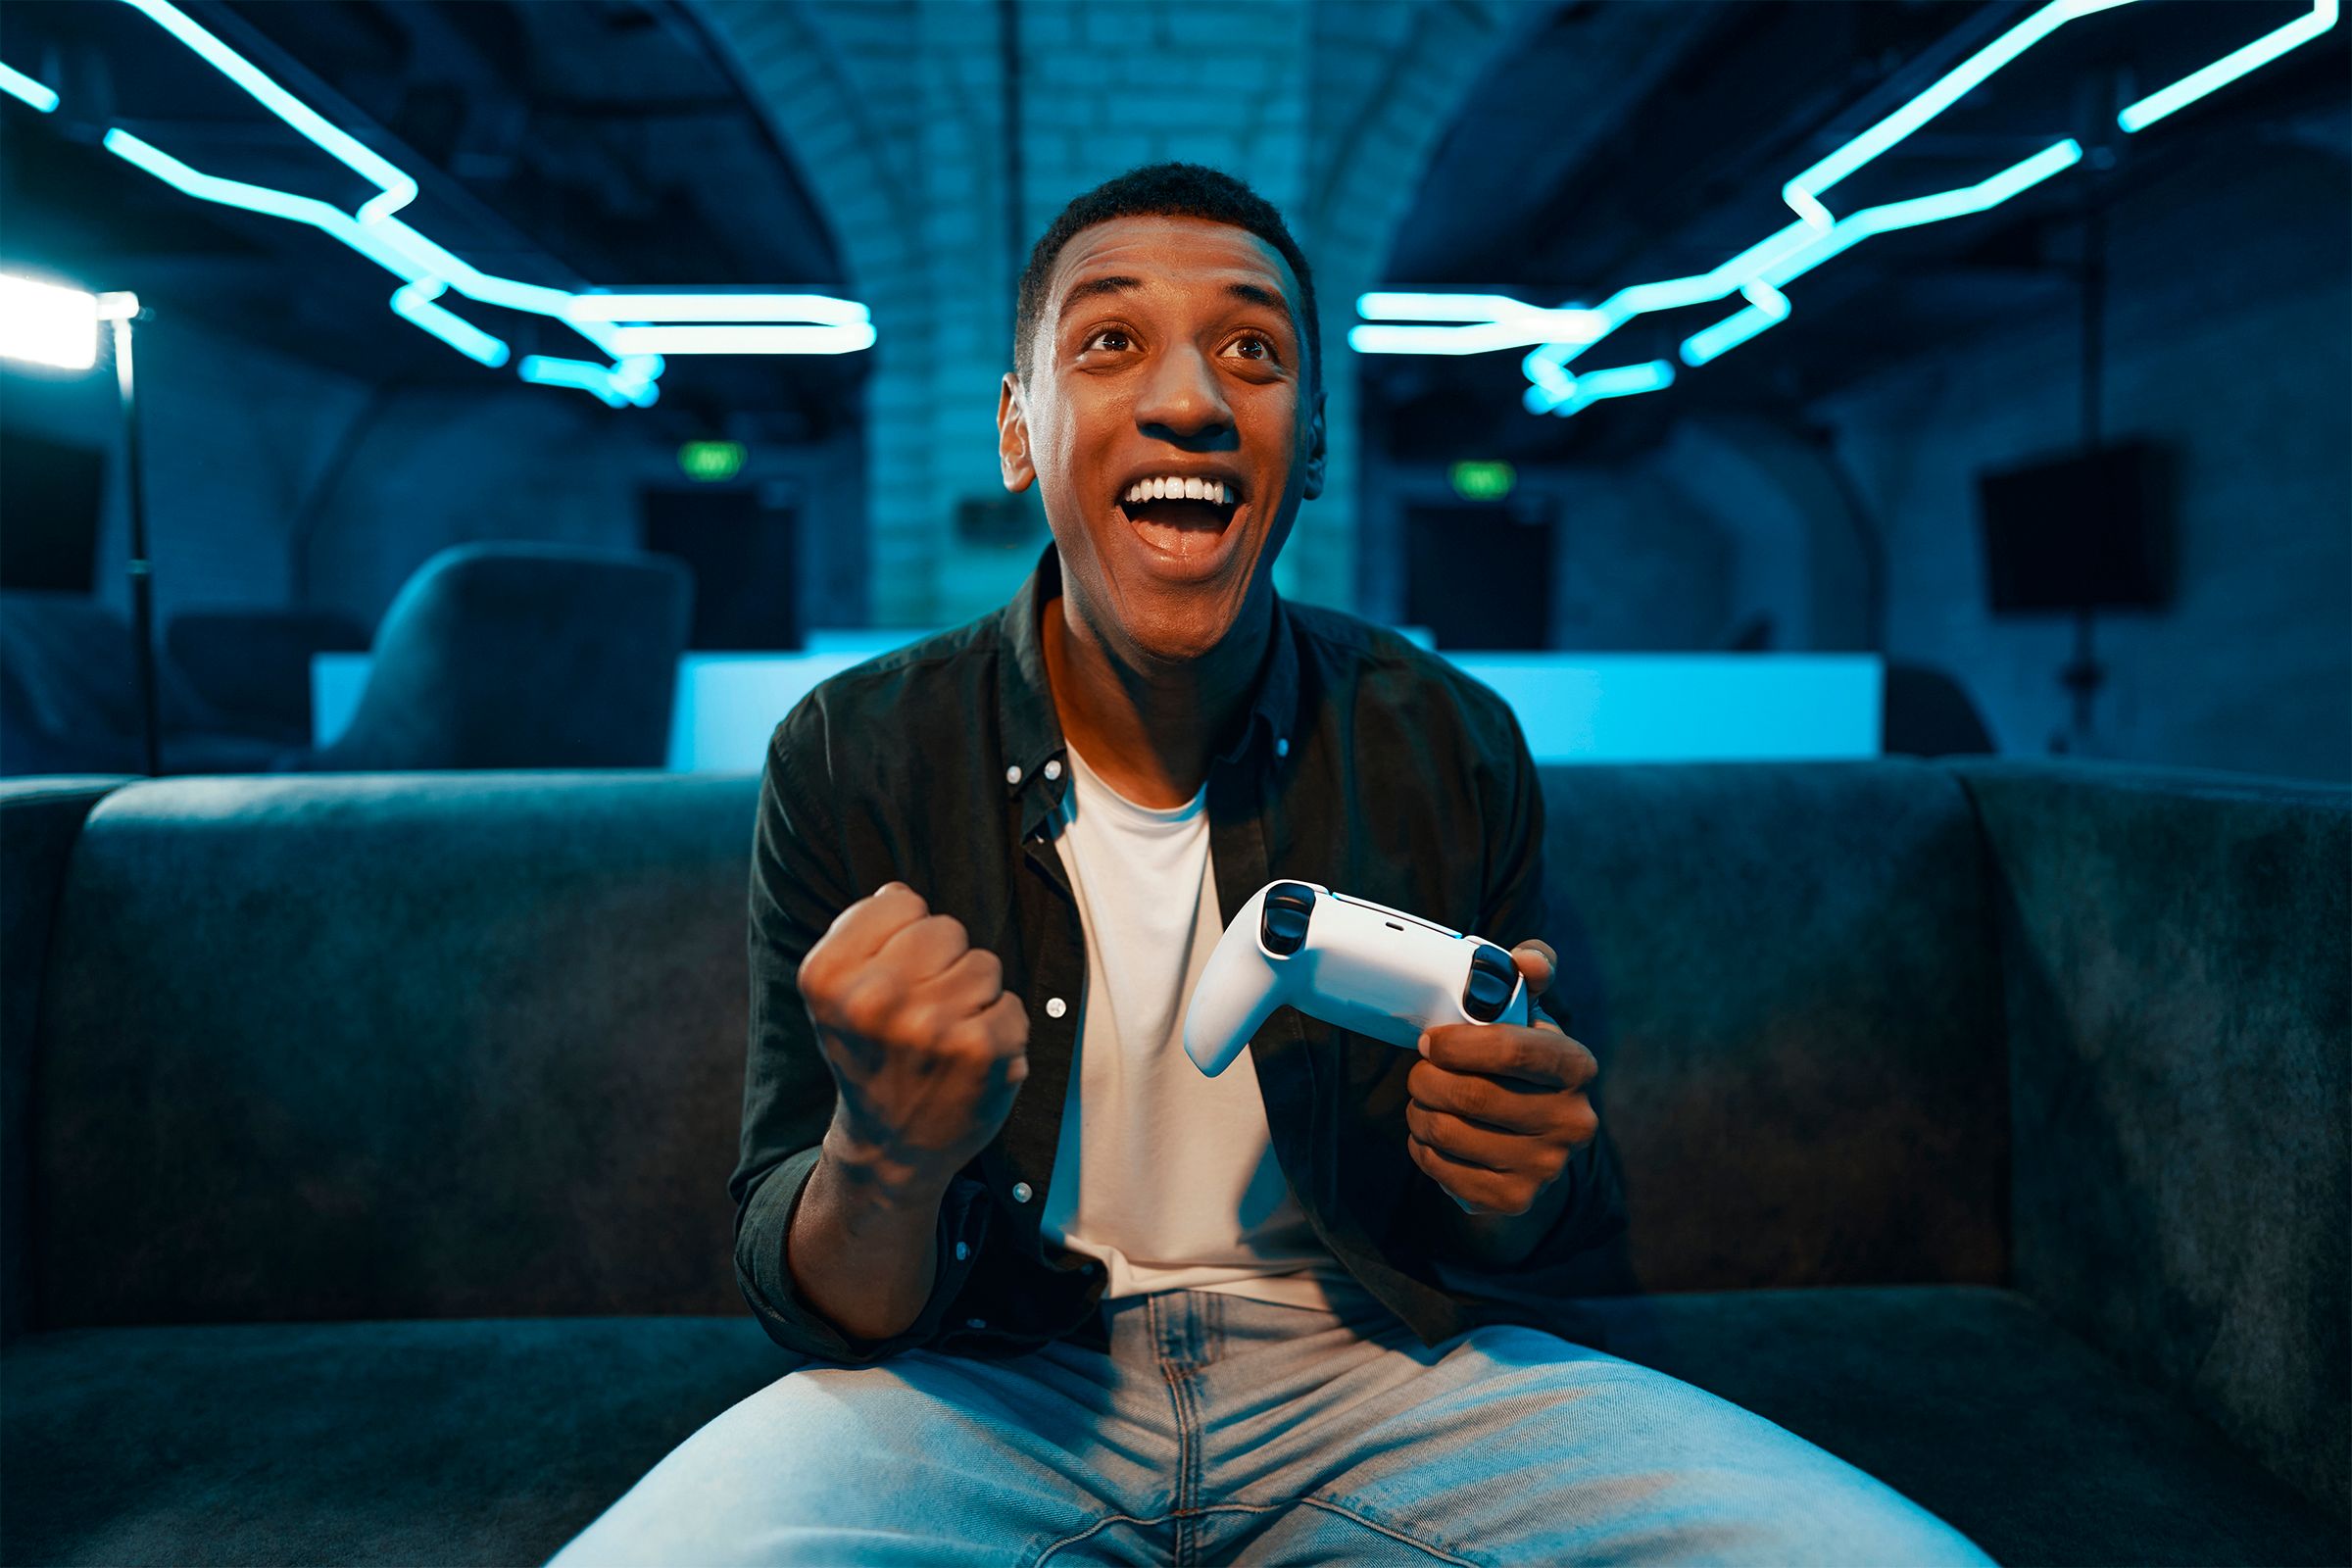 A happy man holding a video game controller.